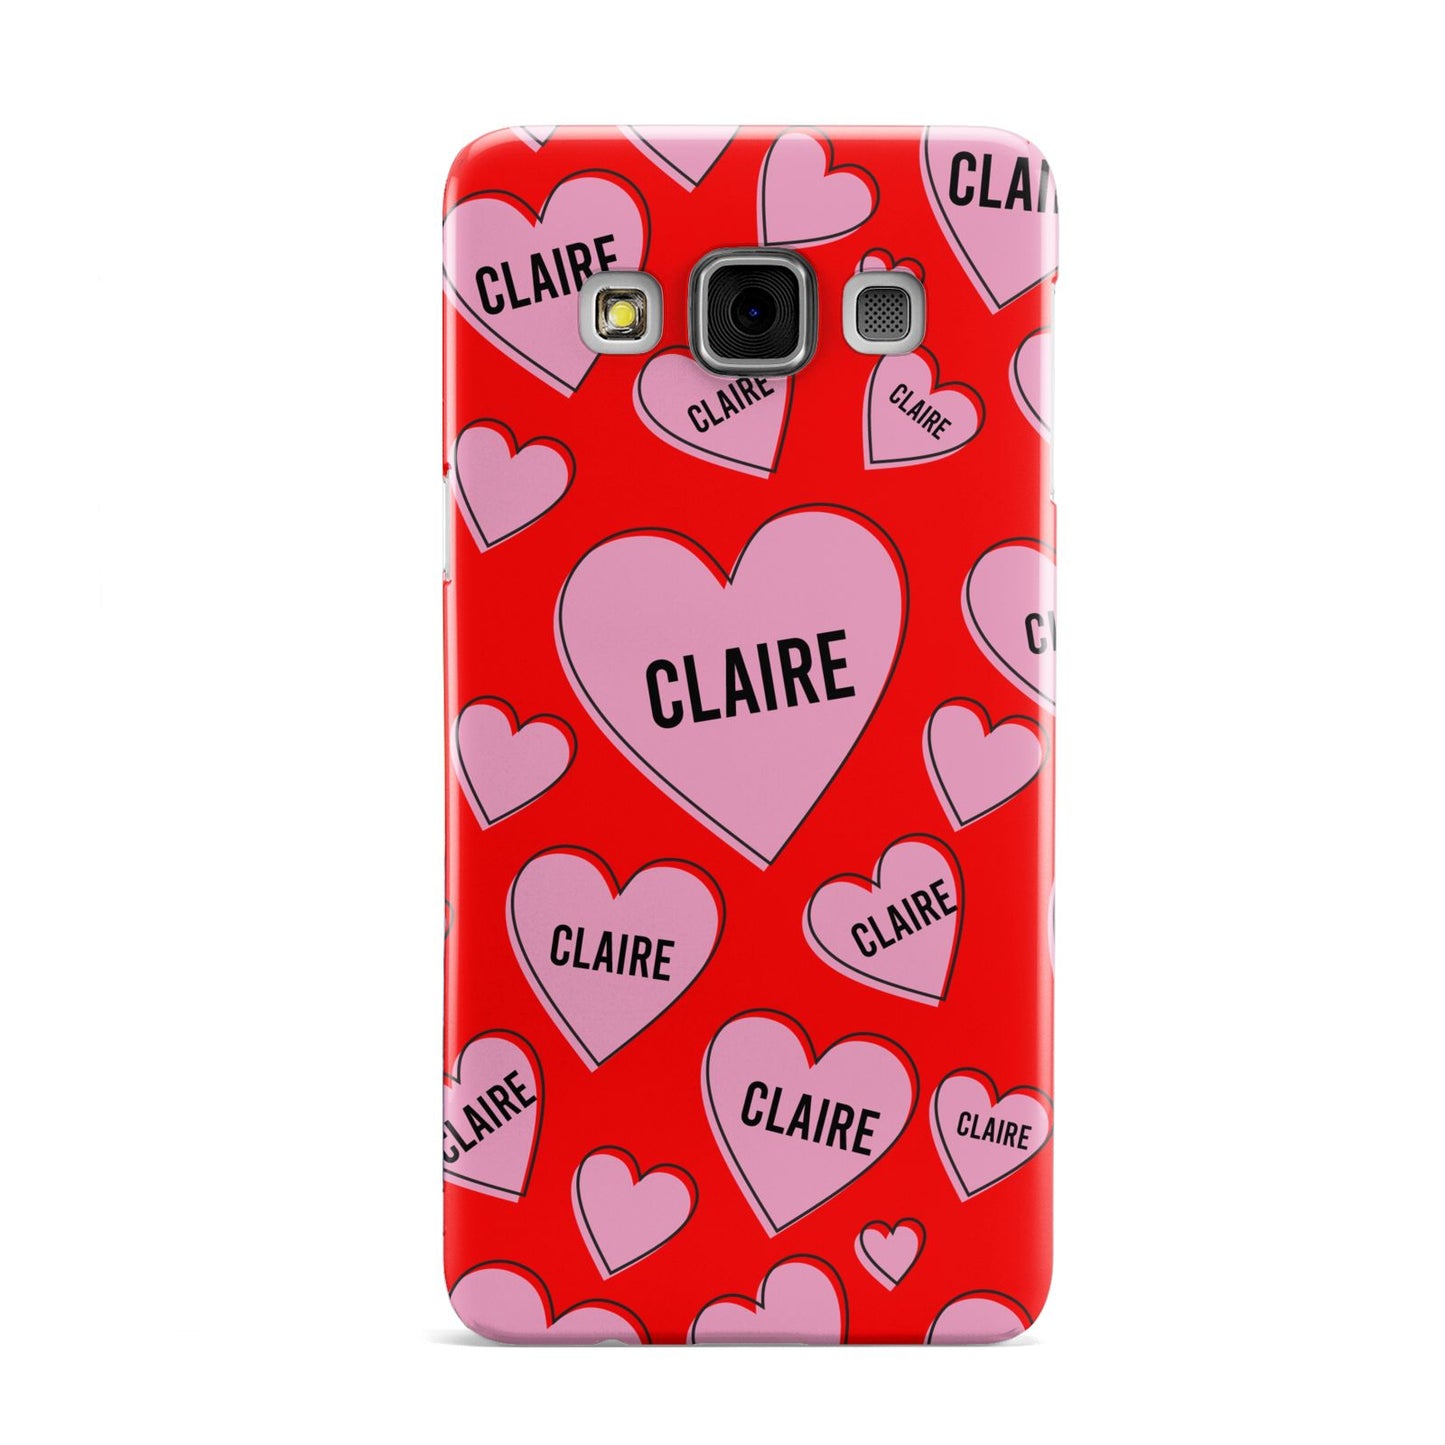 Personalised Hearts Samsung Galaxy A3 Case